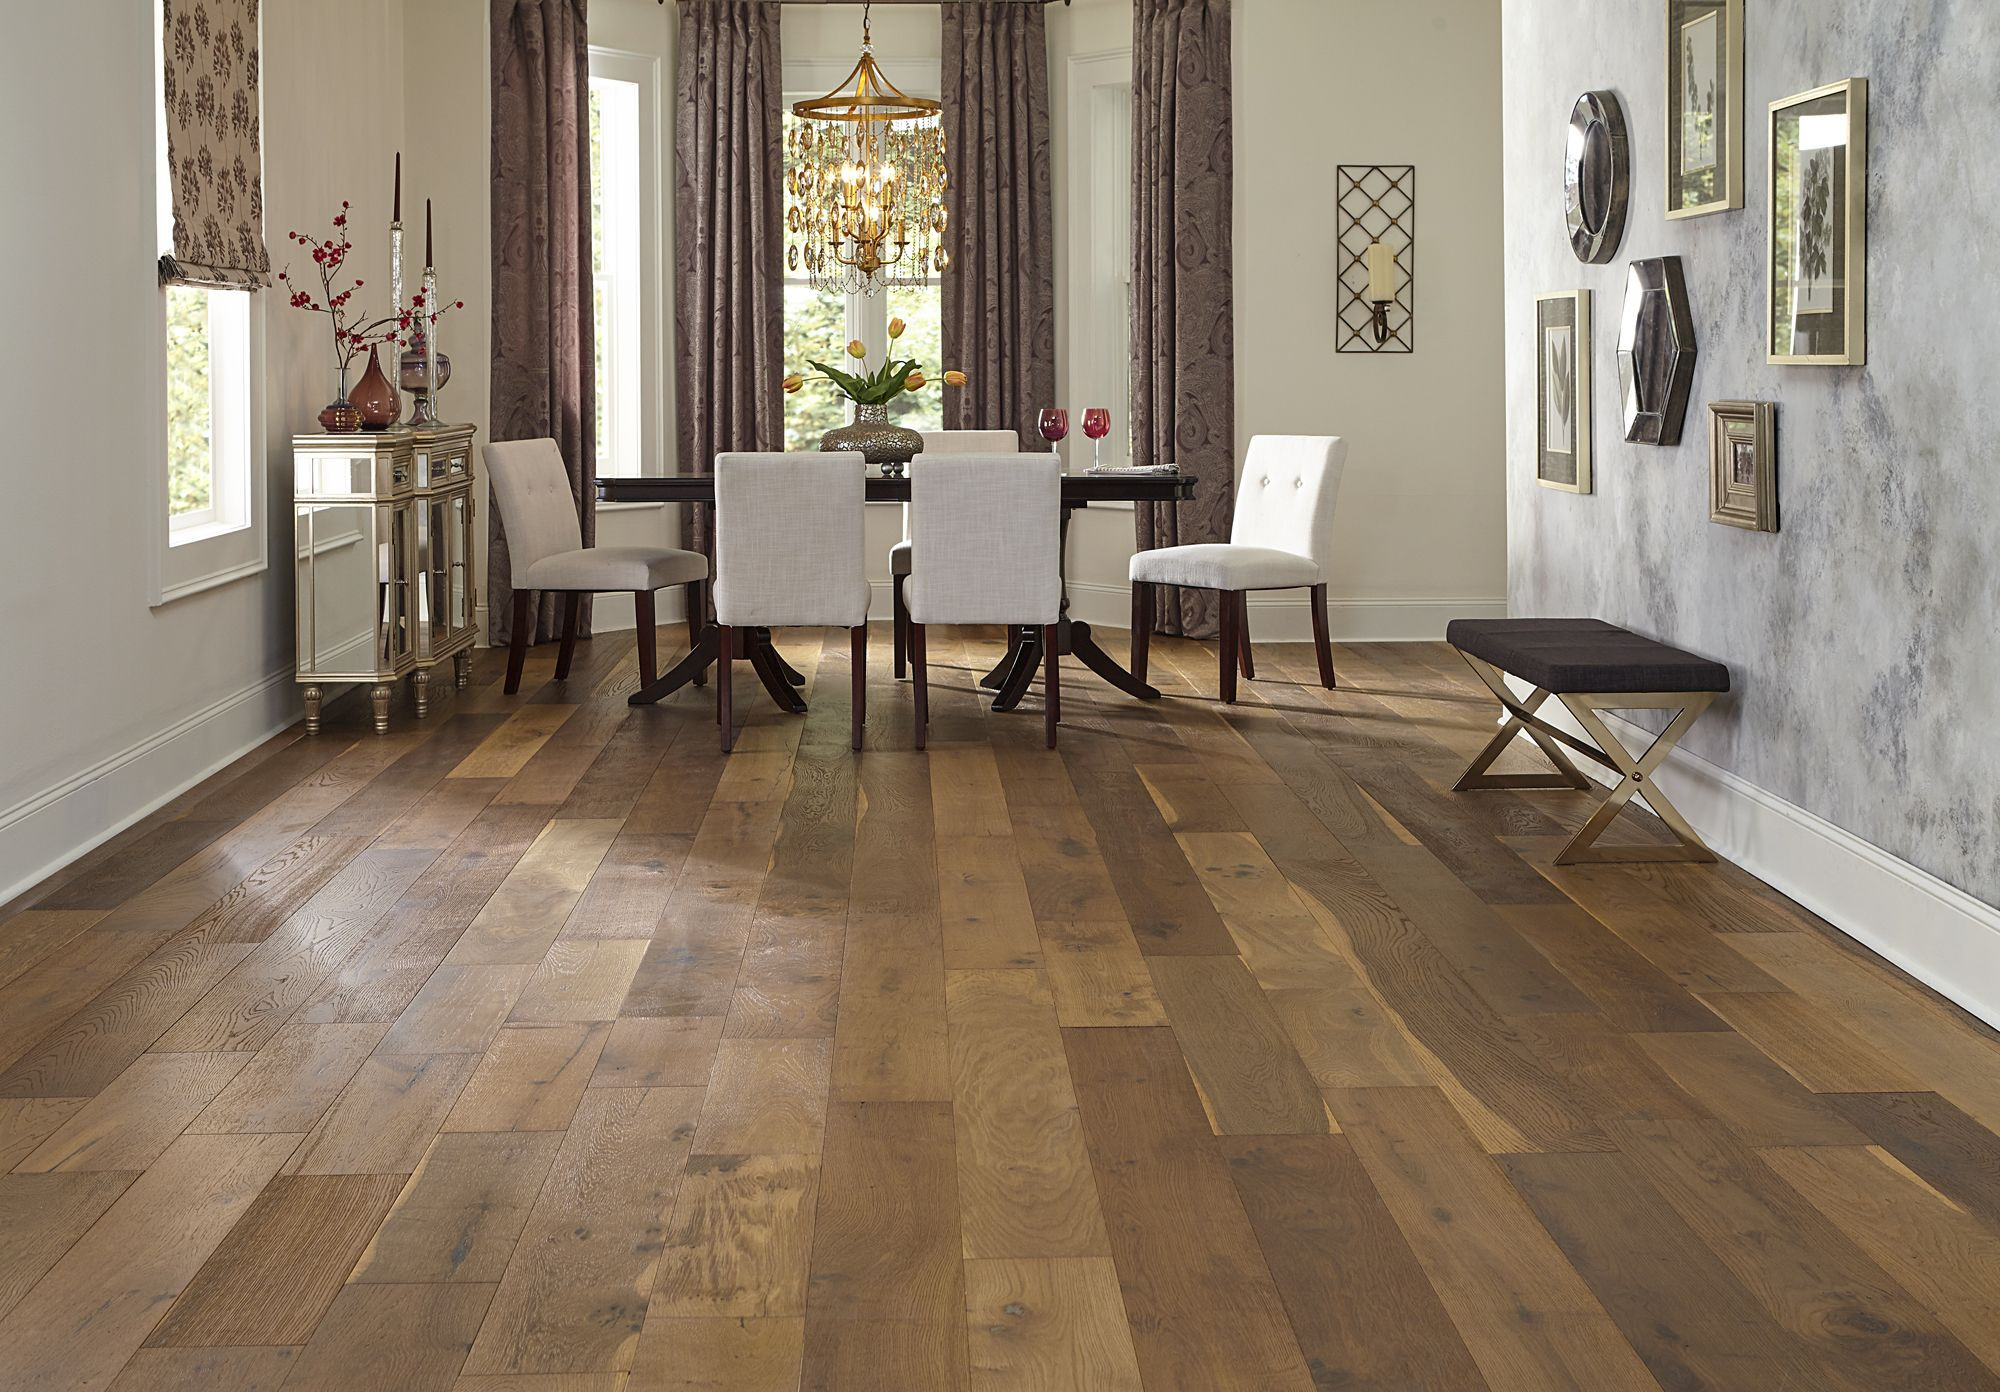 15 Awesome 3 4 Vs 1 2 Inch Engineered Hardwood Flooring 2024 free download 3 4 vs 1 2 inch engineered hardwood flooring of 7 1 2 wide planks and a rustic look bellawood willow manor oak has in 7 1 2 wide planks and a rustic look bellawood willow manor oak has a sto